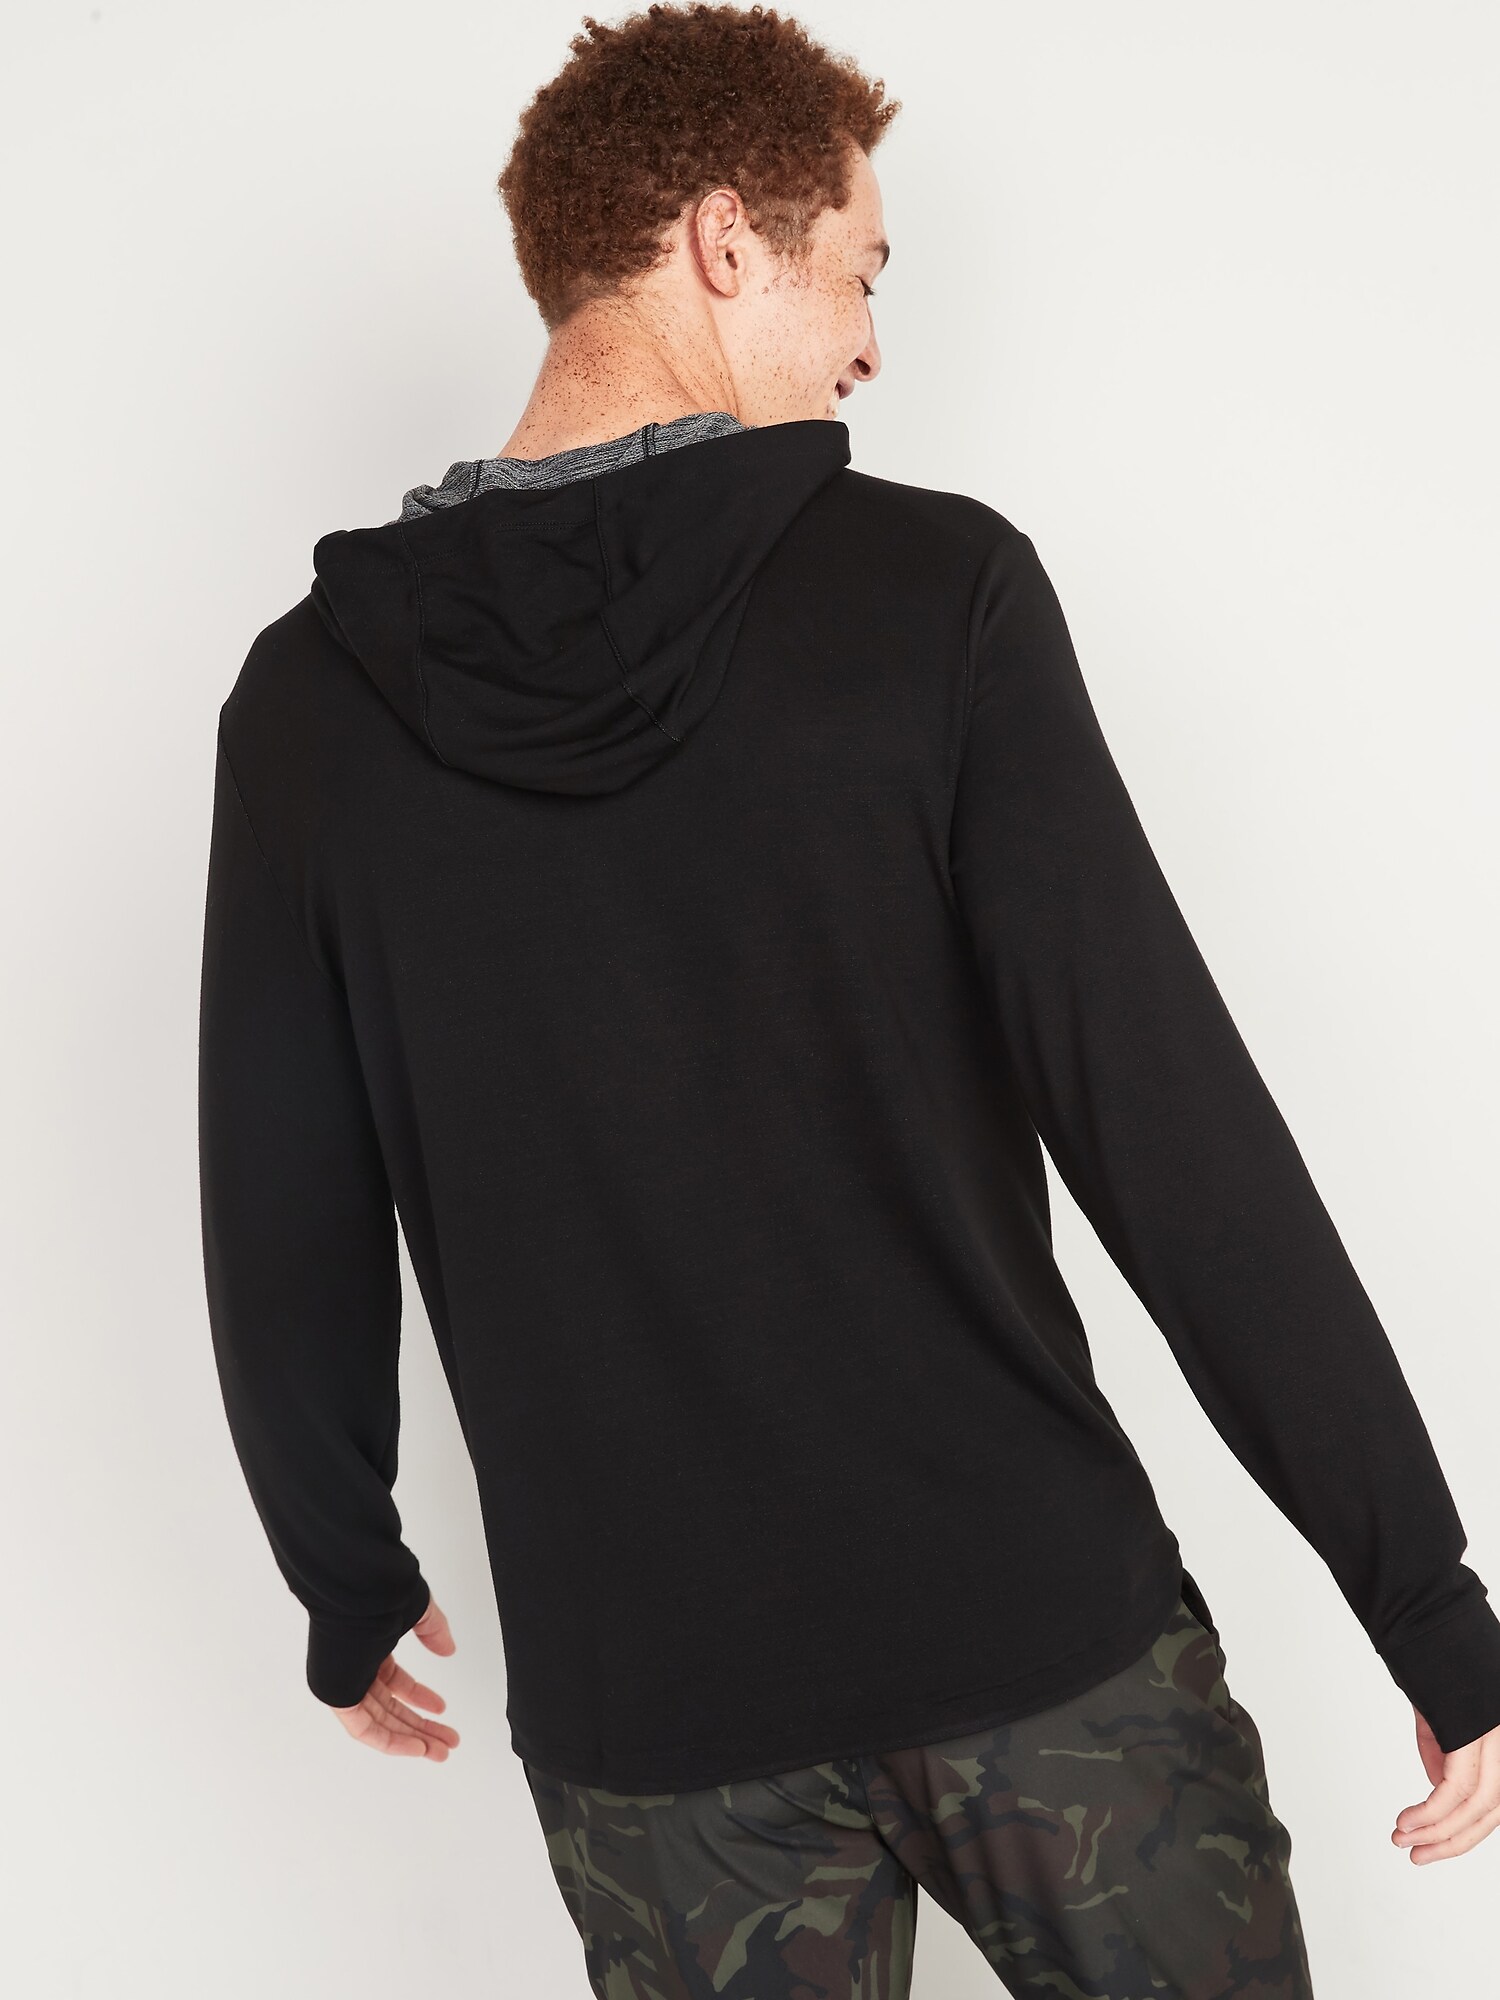 Loop-Terry 4-Way Stretch Pullover Hoodie for Men | Old Navy